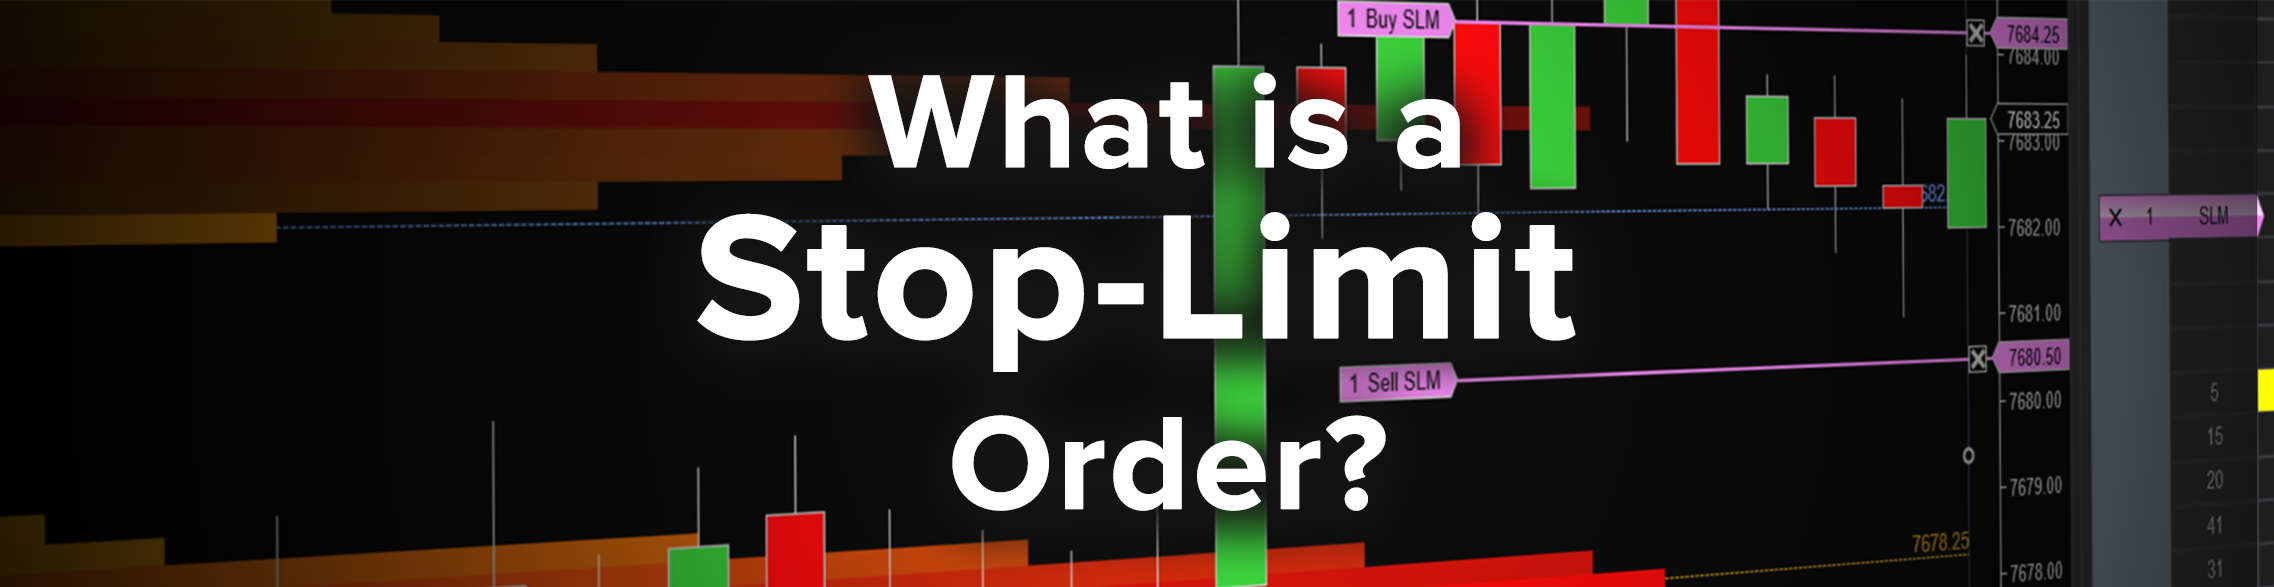 Stop limit order futures trading